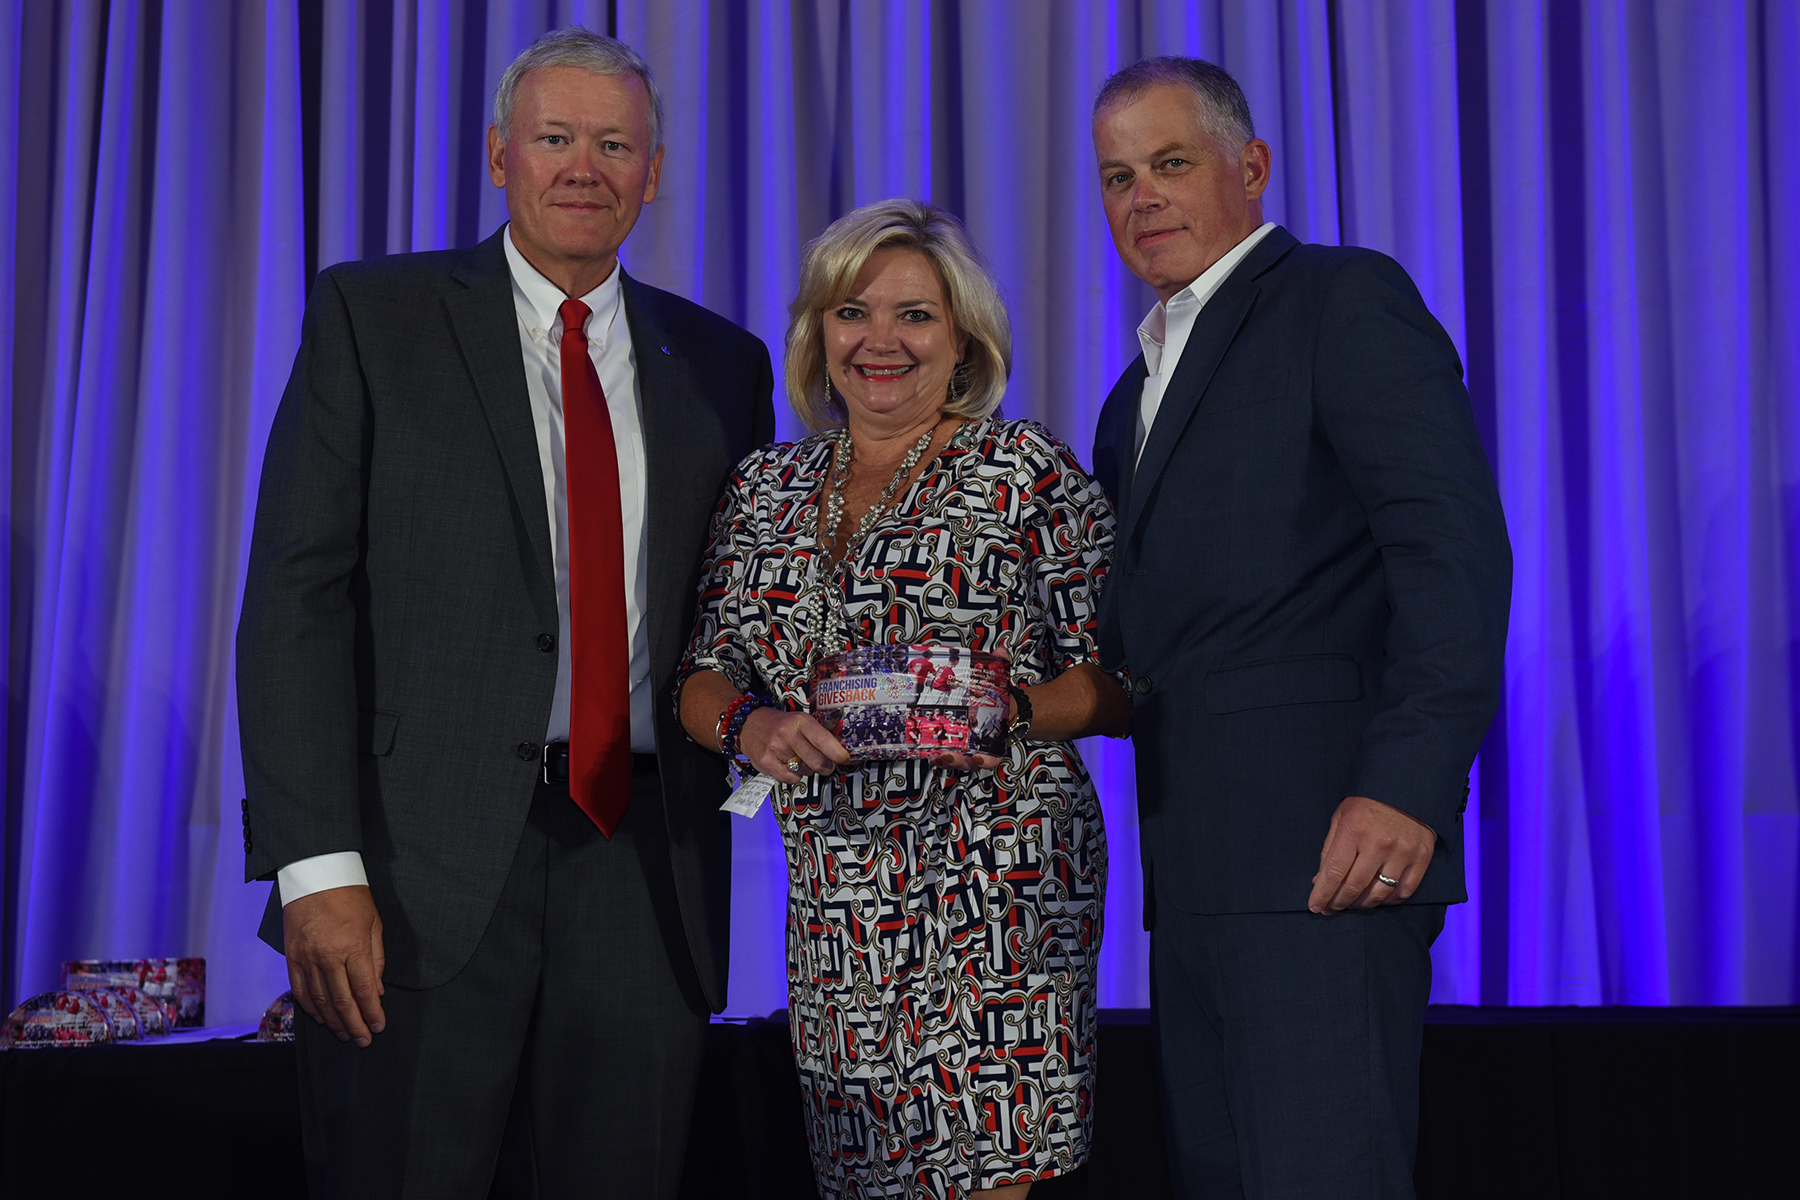 Janet Harris, CFE, presented with the Franchising Gives Back Award.